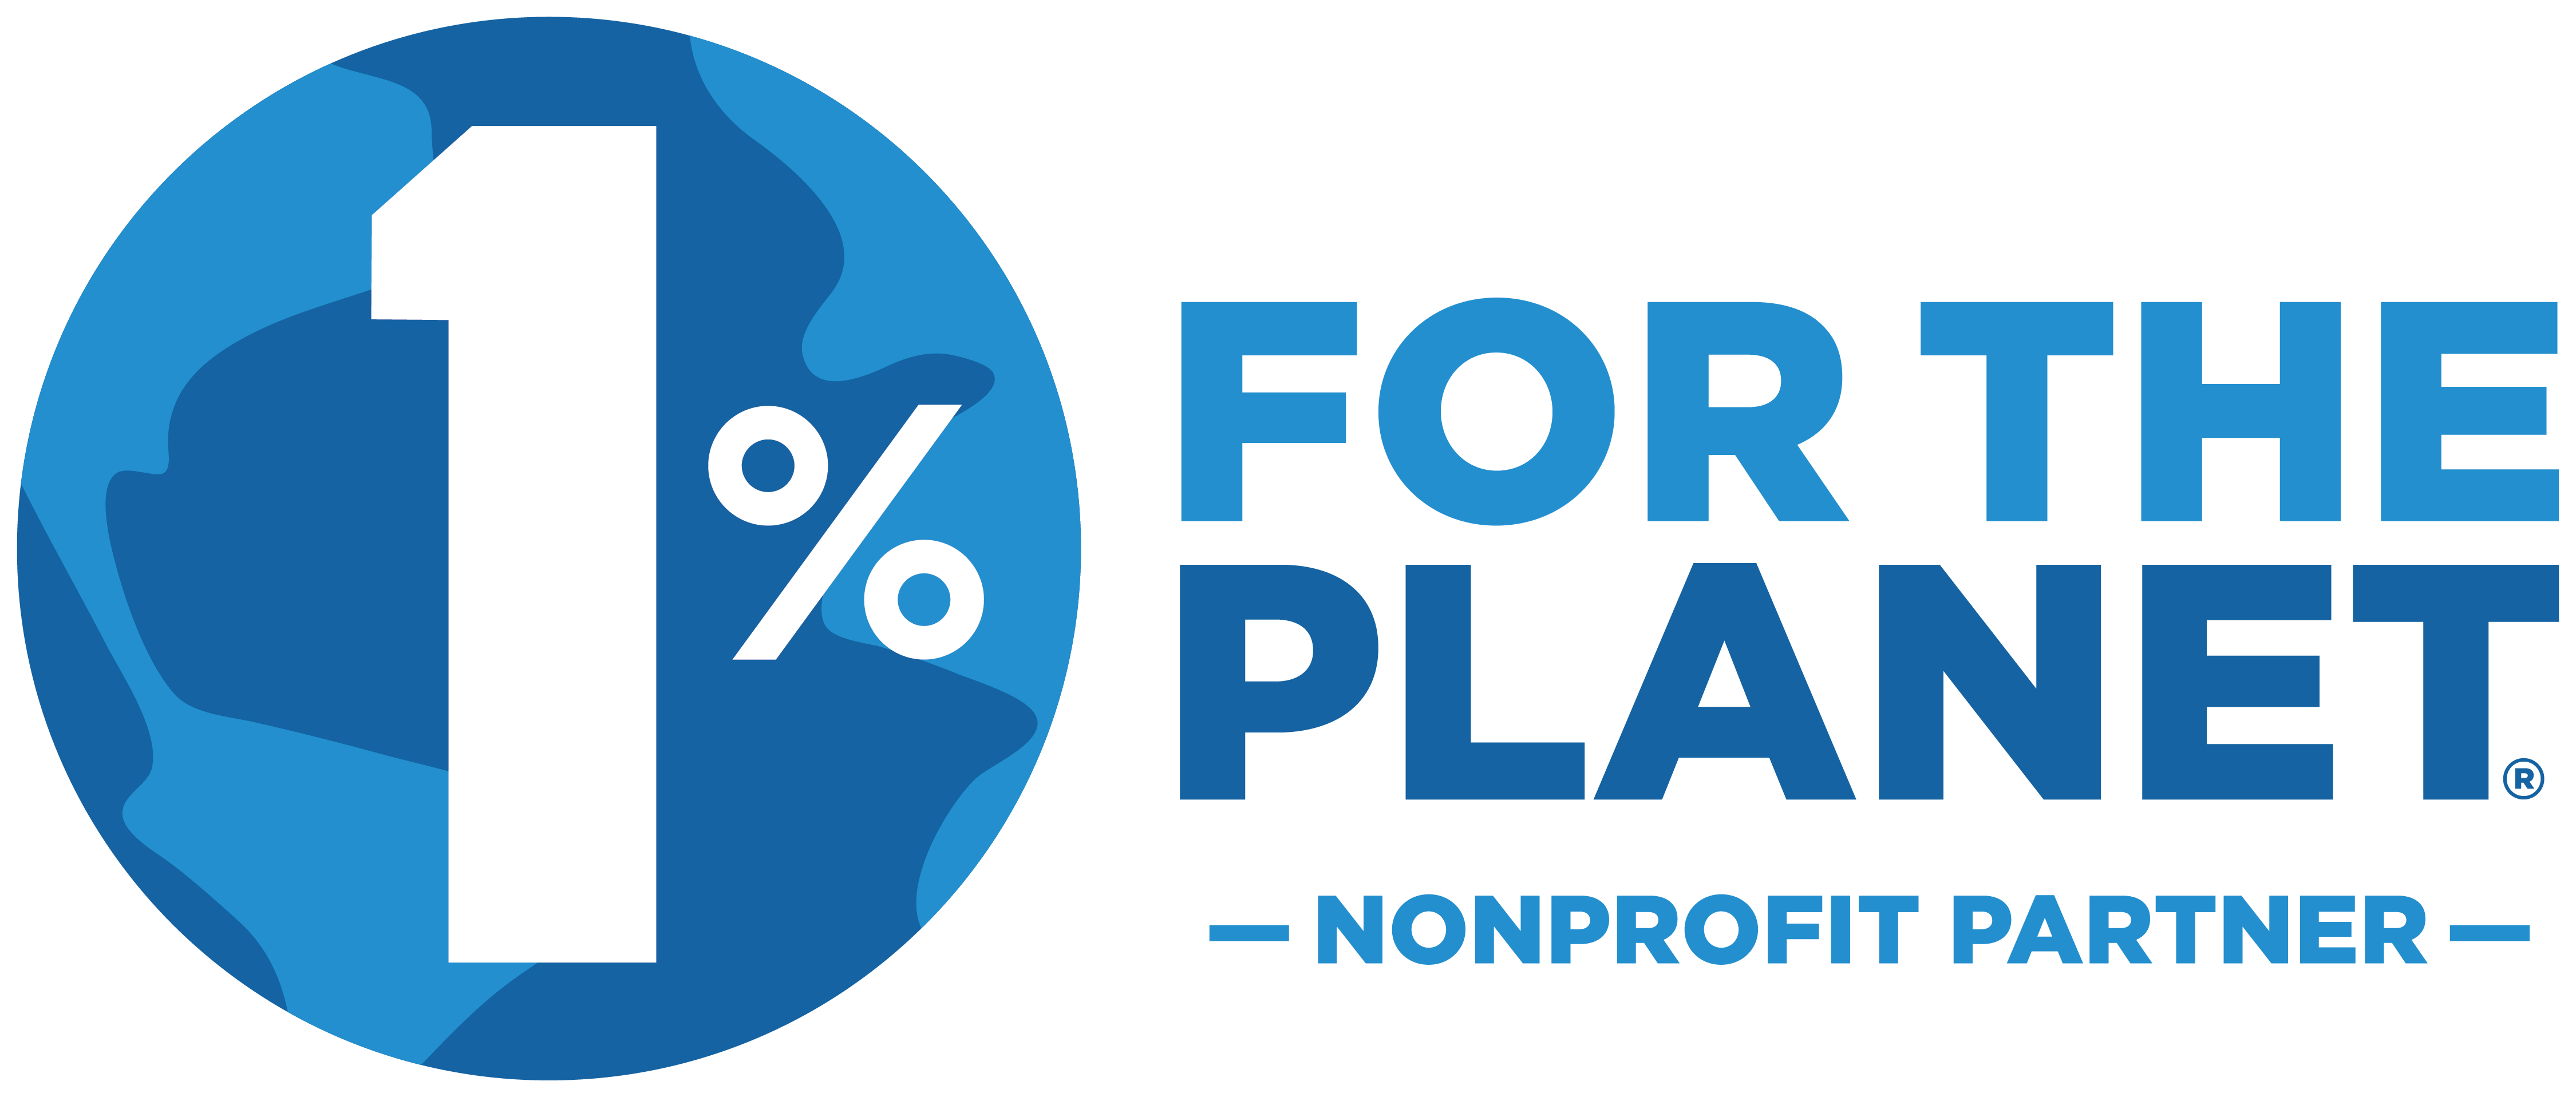 1% for the Planet: Nonprofit Partner